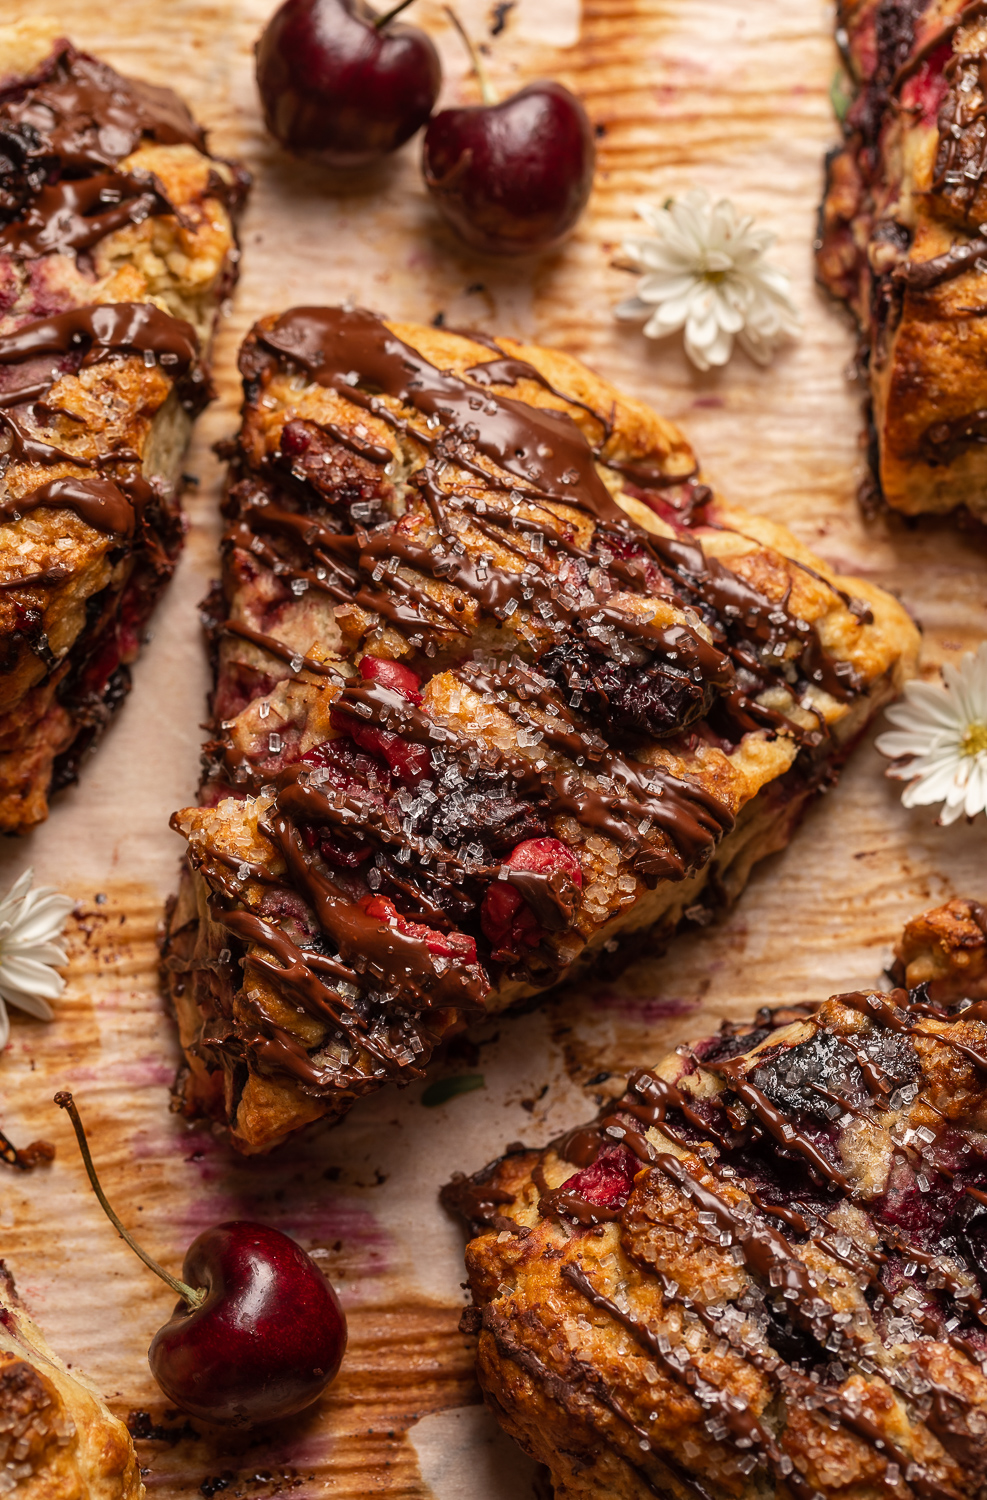 Golden brown, loaded with juicy cherries, and drizzled with dark chocolate, these Chocolate Covered Cherry Scones are a total showstopper! Perfect for breakfast or brunch and so good with a cup of coffee! For an extra chocolate kick, add a 1/2 cup of mini chocolate chips!